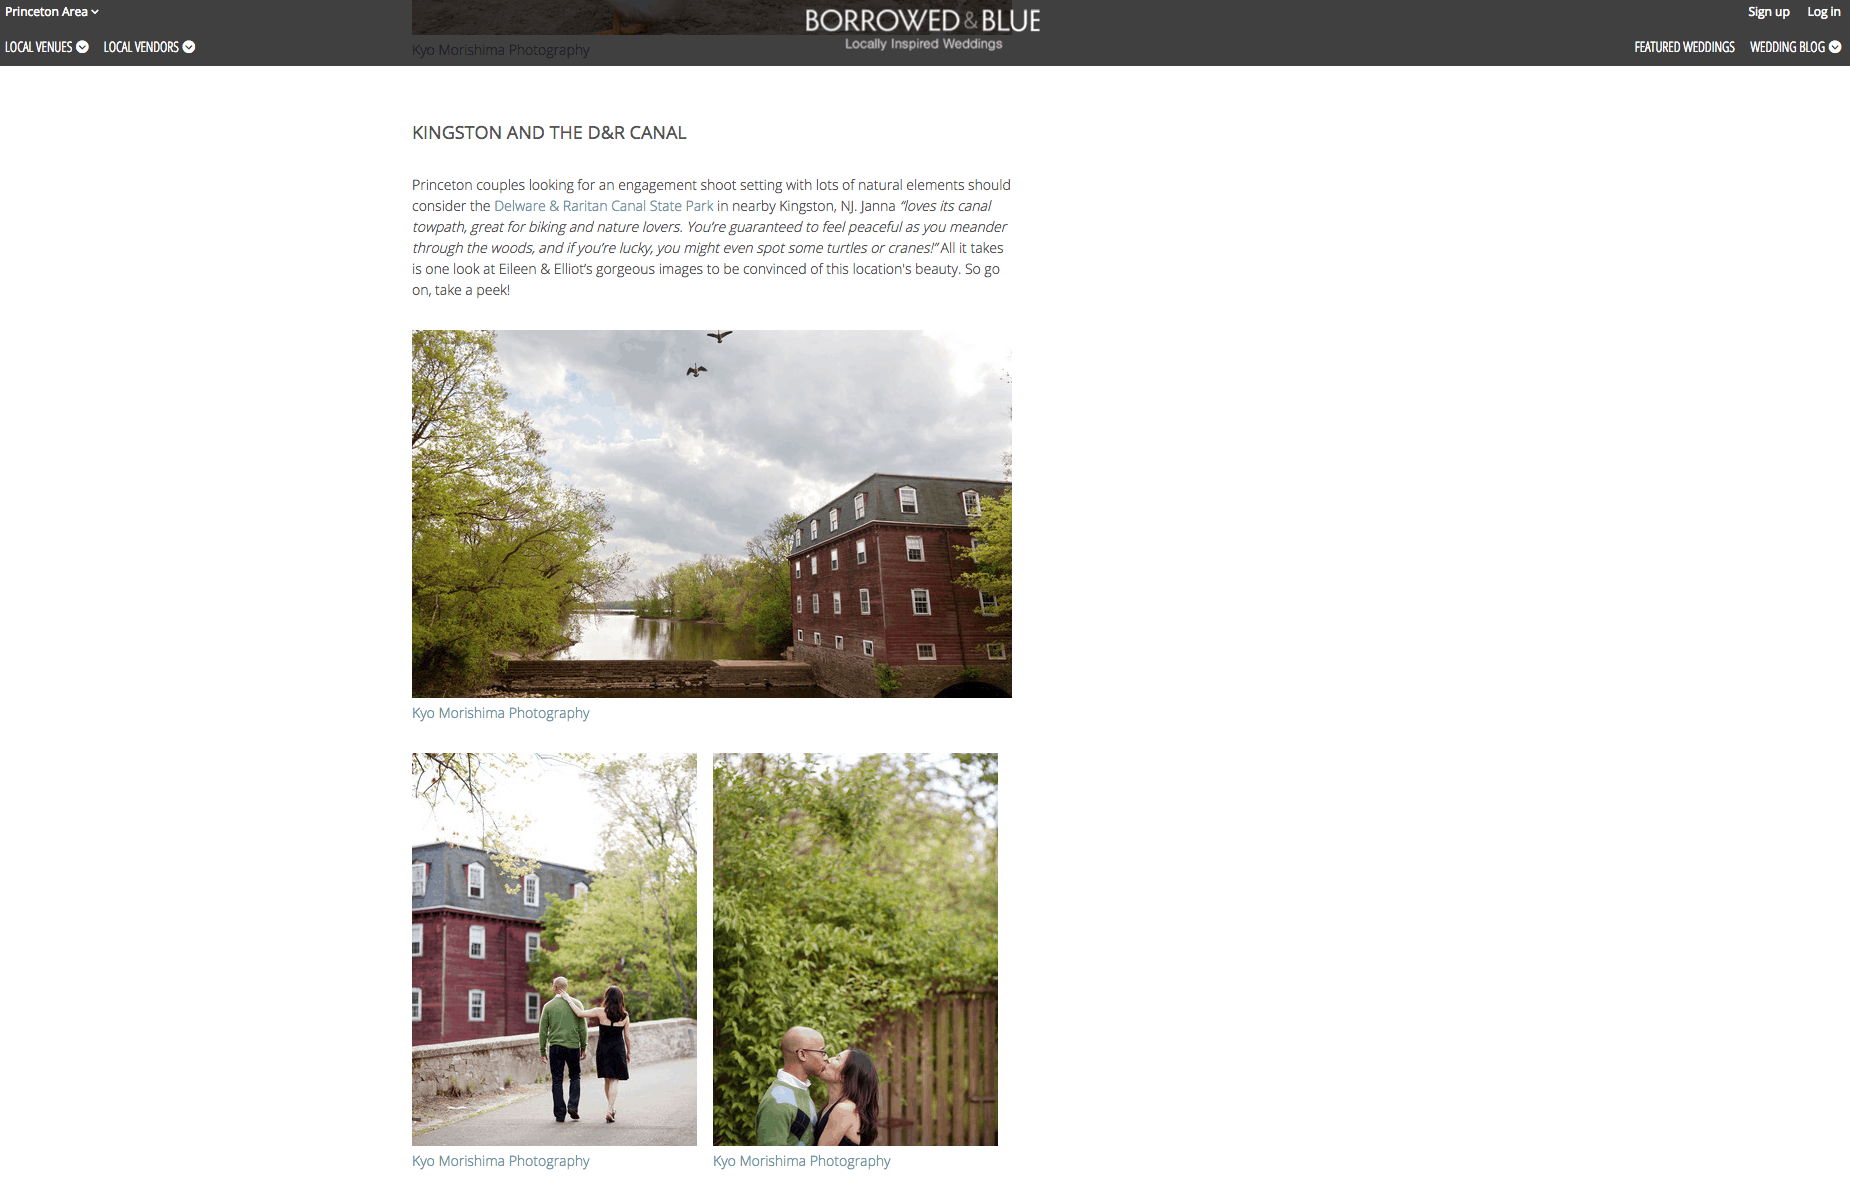 An article about the best engagement session locations in Princeton, with photos by Kyo Morishima Photography, on Borrowed and Blue.